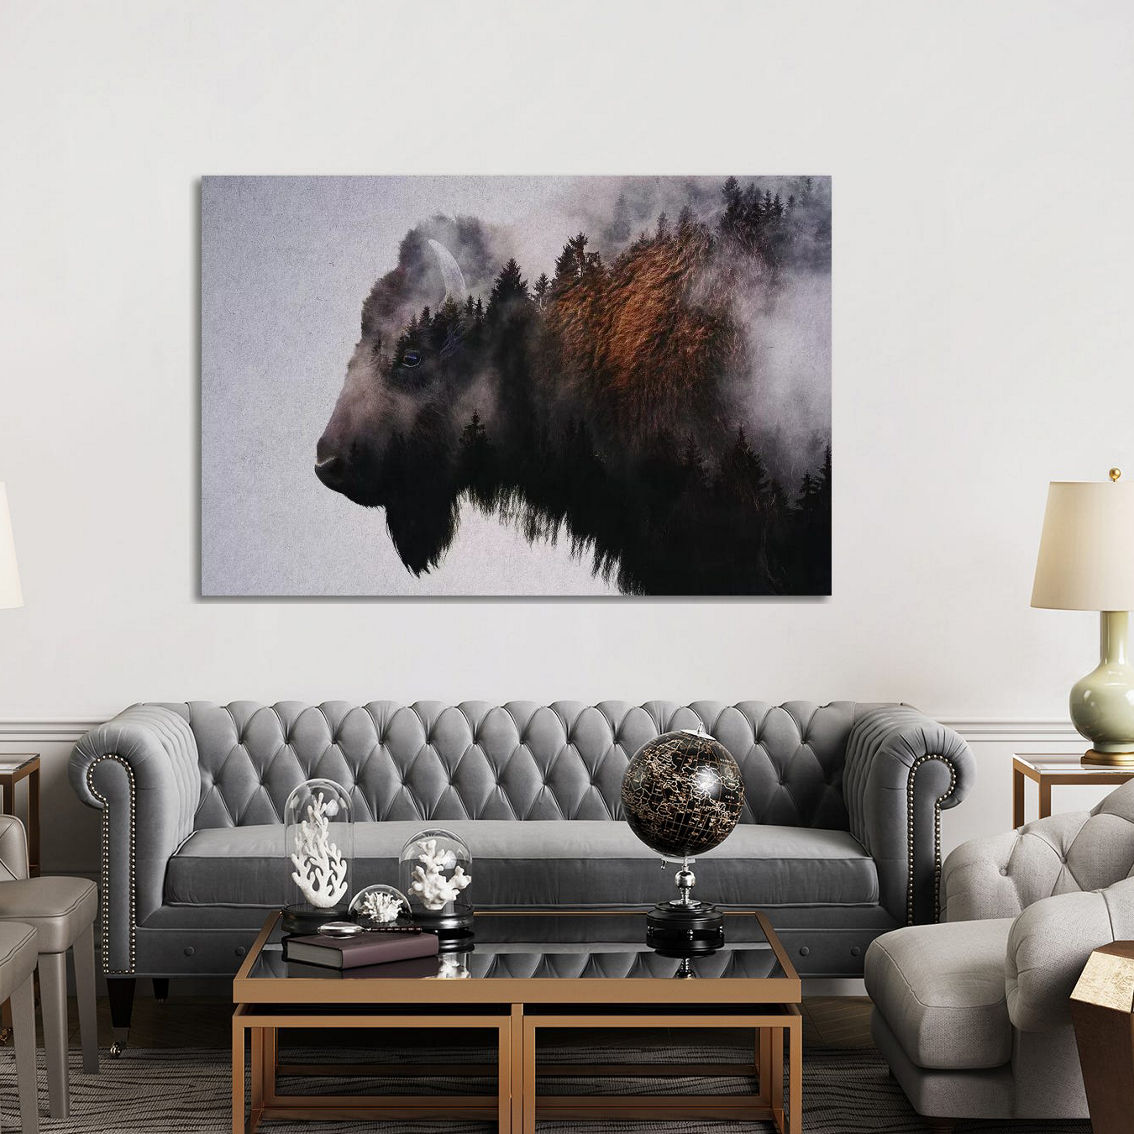 Bison Photography Stylish Canvas Art Print by Andreas Lie - Large Art - Image 2 of 2